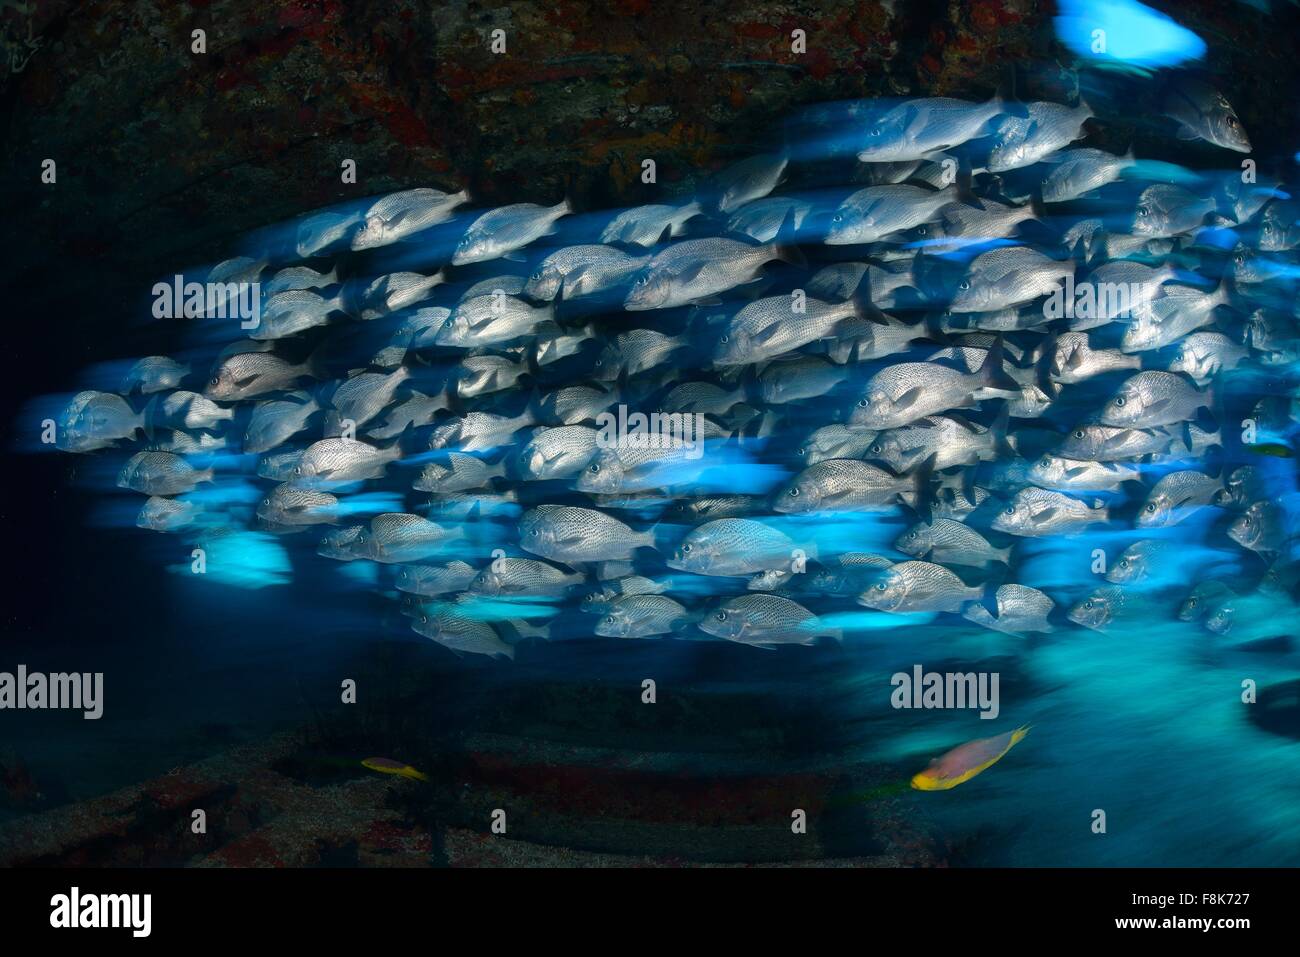 School of grunt snappers seeking shelter inside ship wreck, Quintana Roo, Mexico Stock Photo